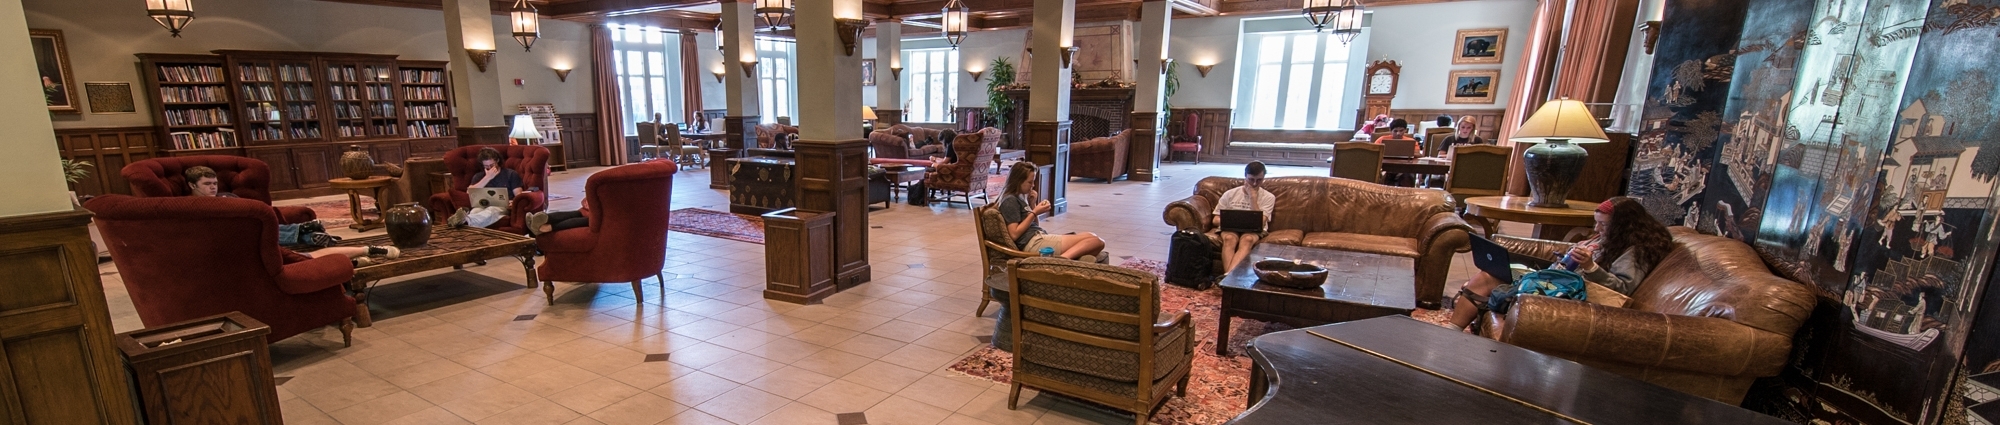 Students studying in the Memorial Union